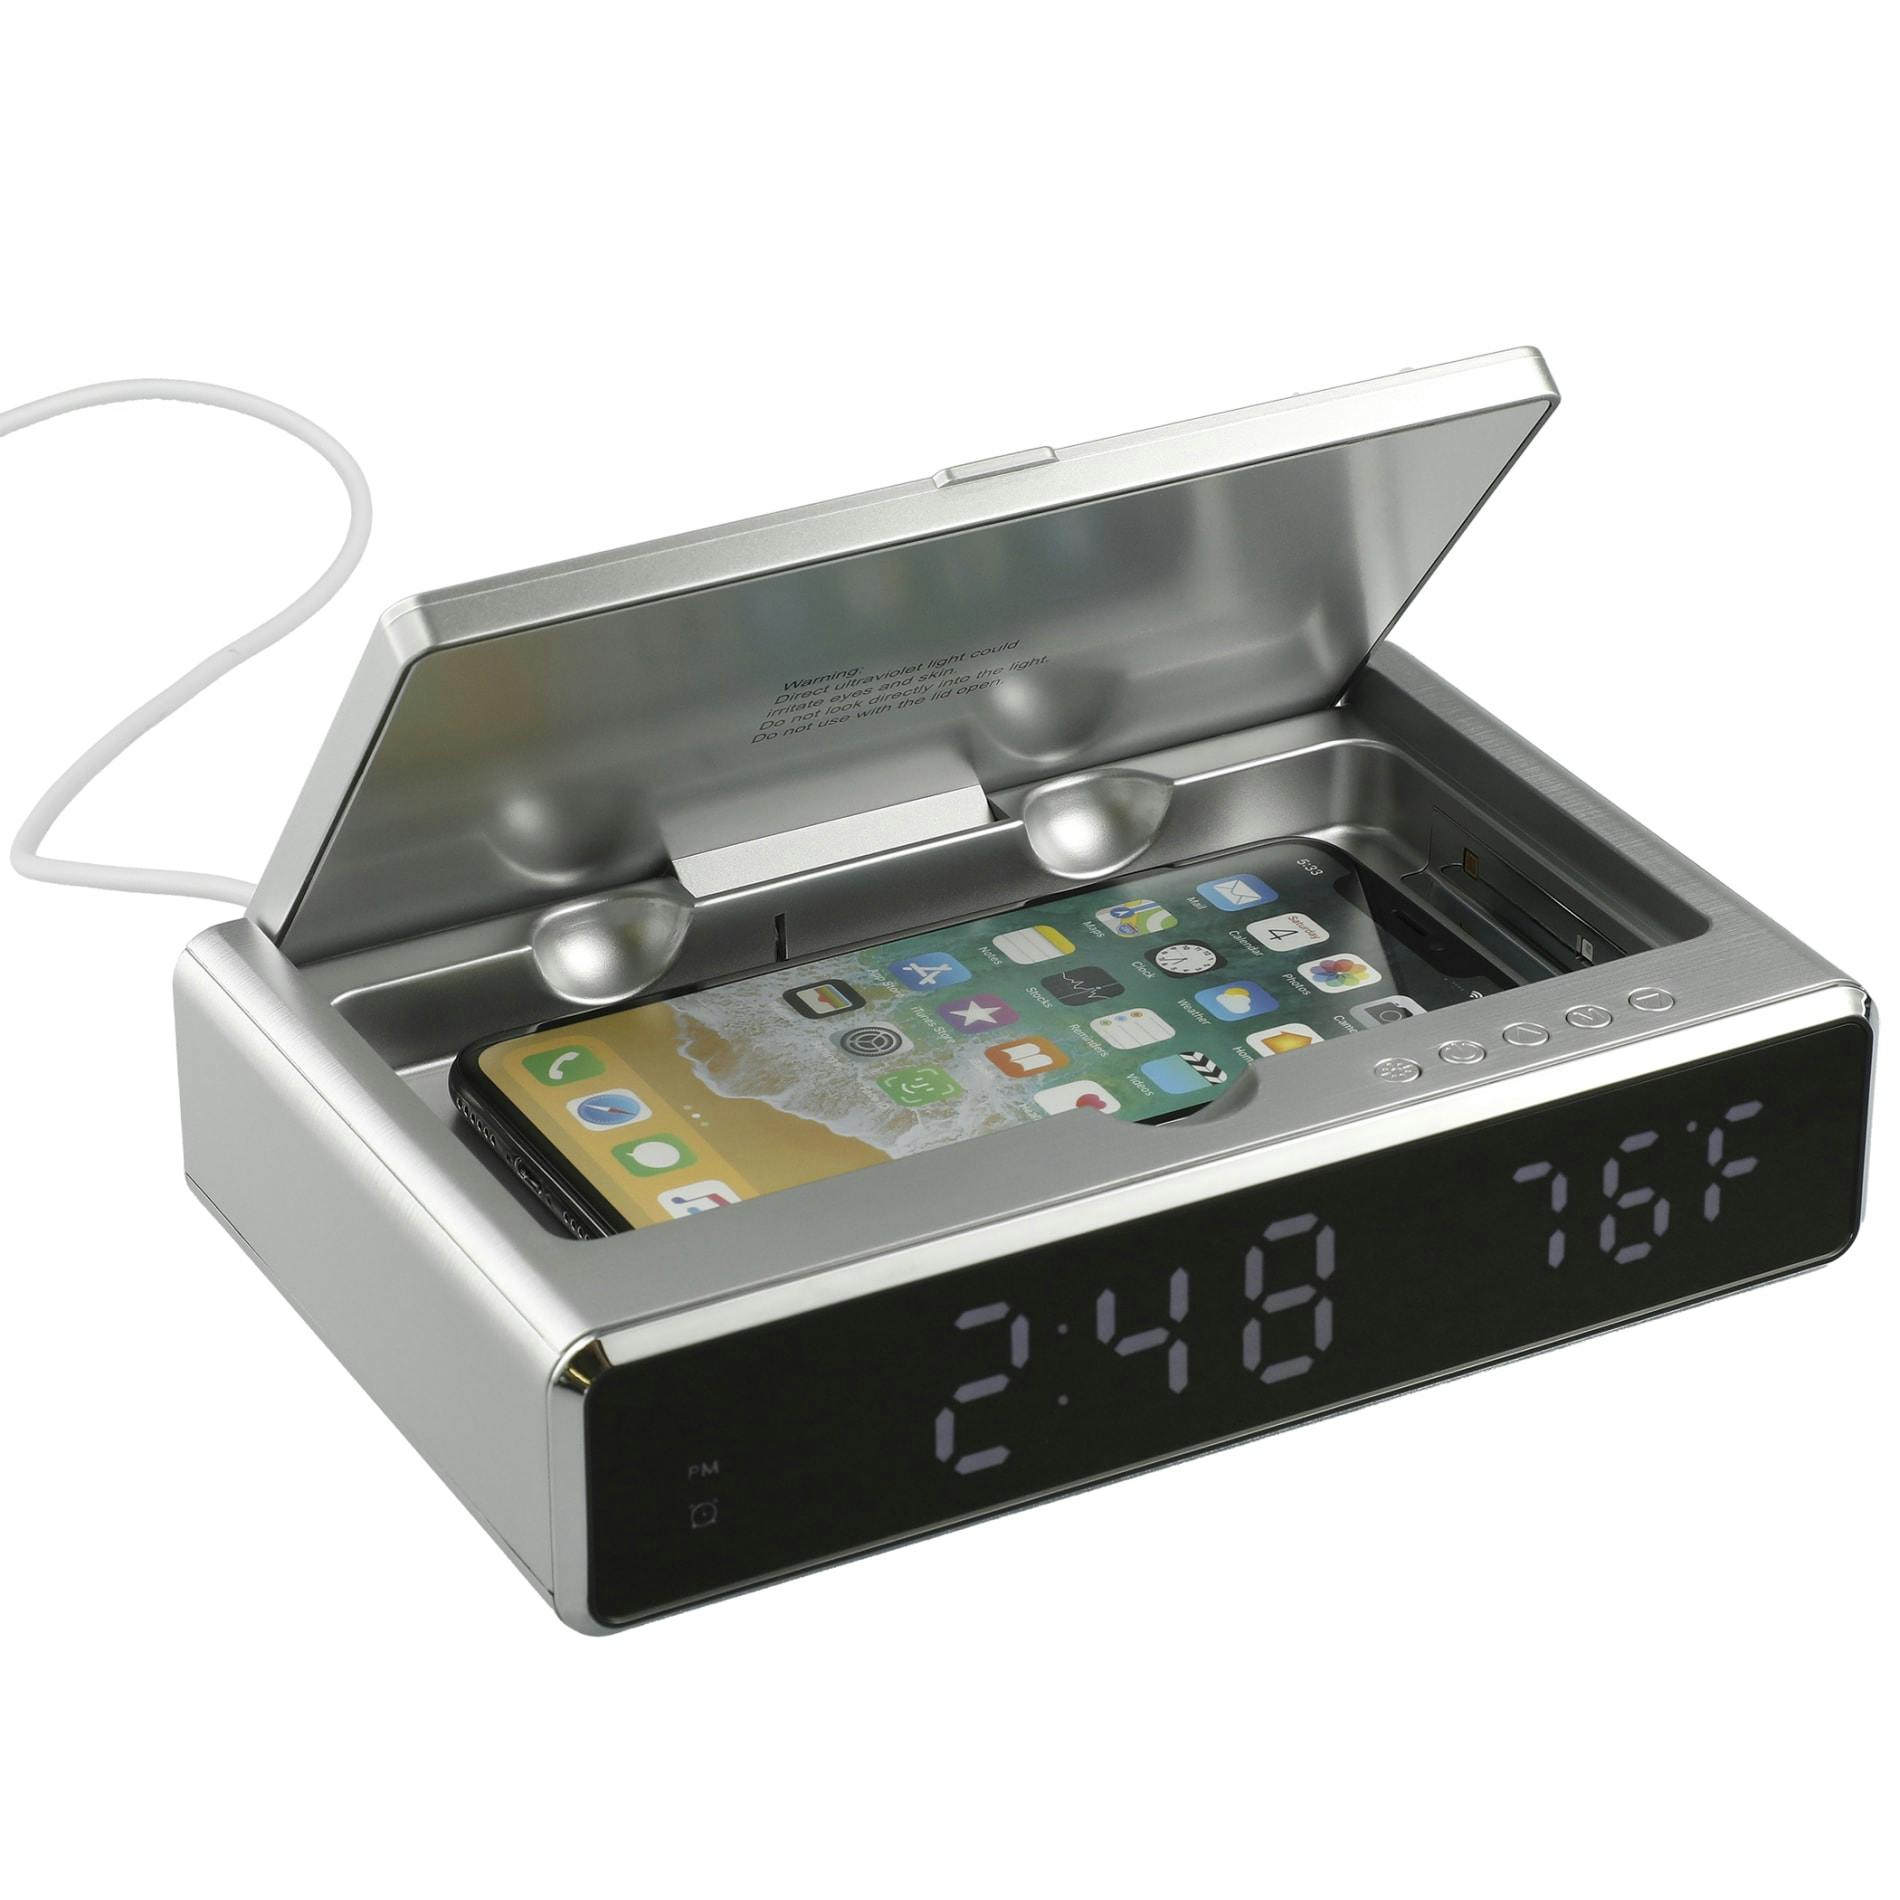 UV Sanitizer Desk Clock with Wireless Charging - additional Image 1